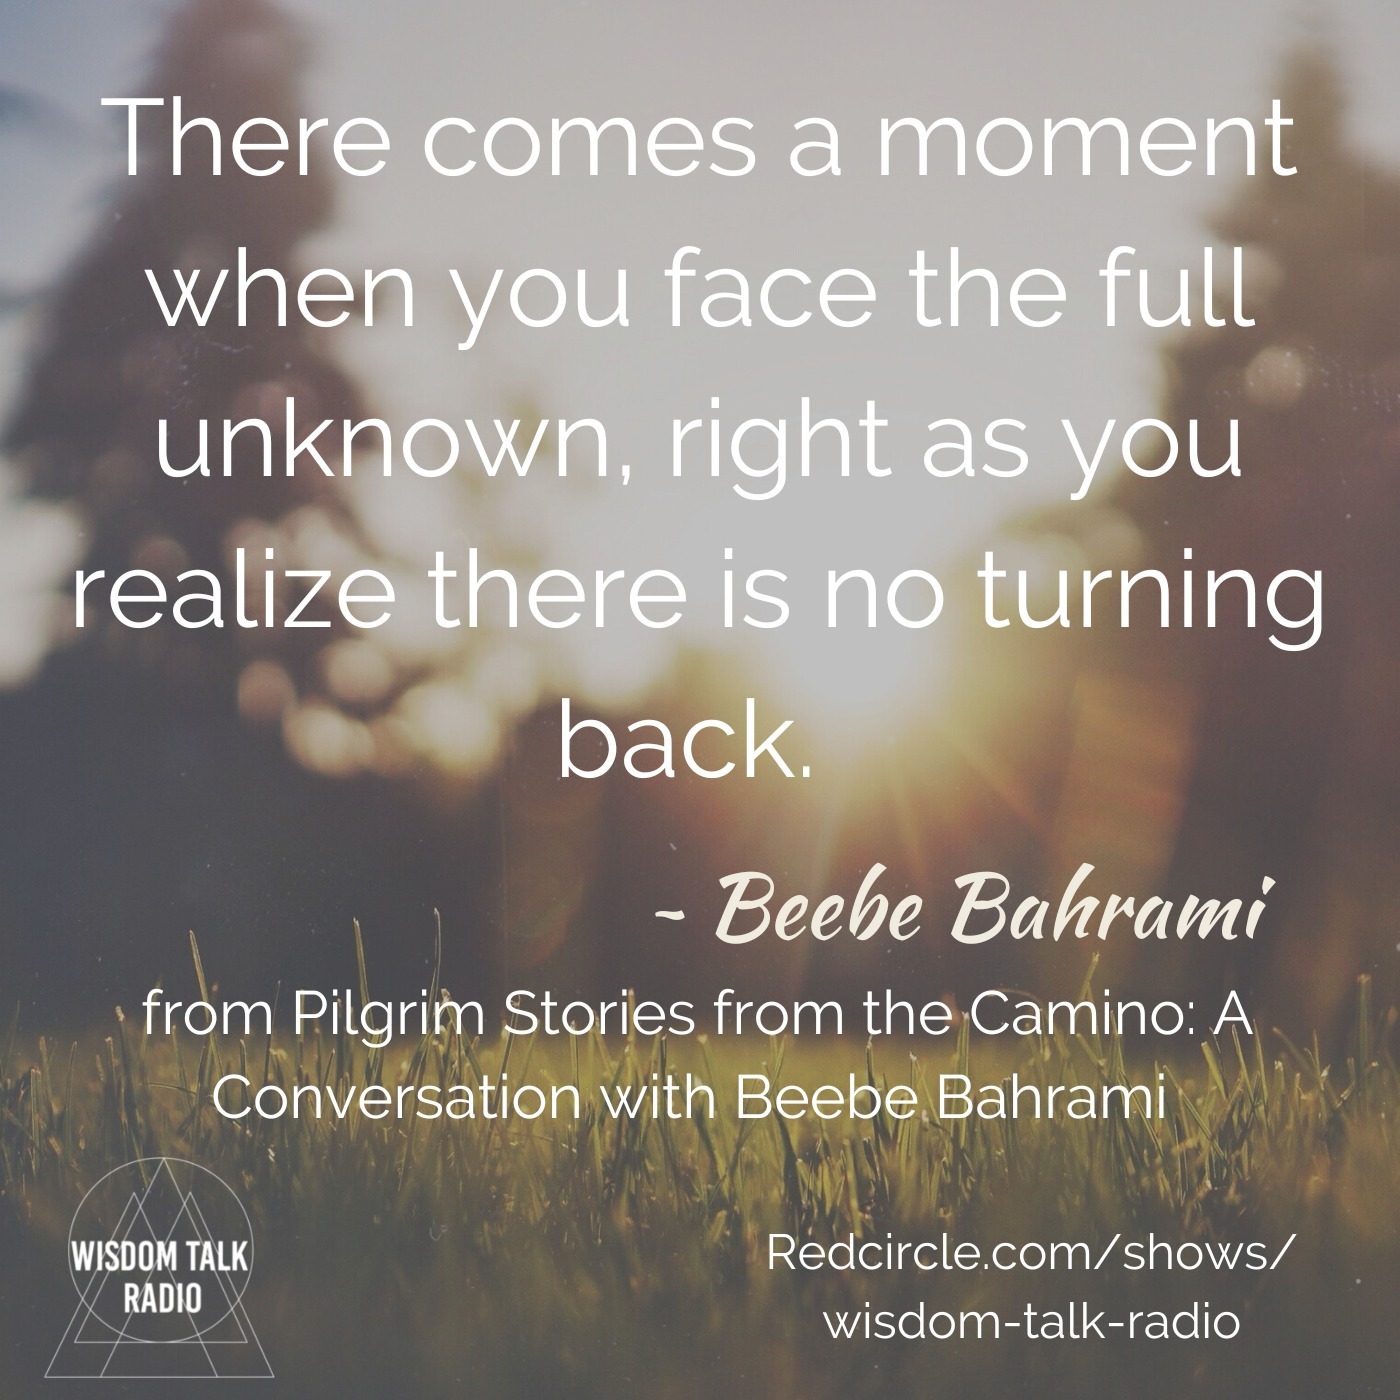 Pilgrim Stories from the Camino: A Conversation with Beebe Bahrami